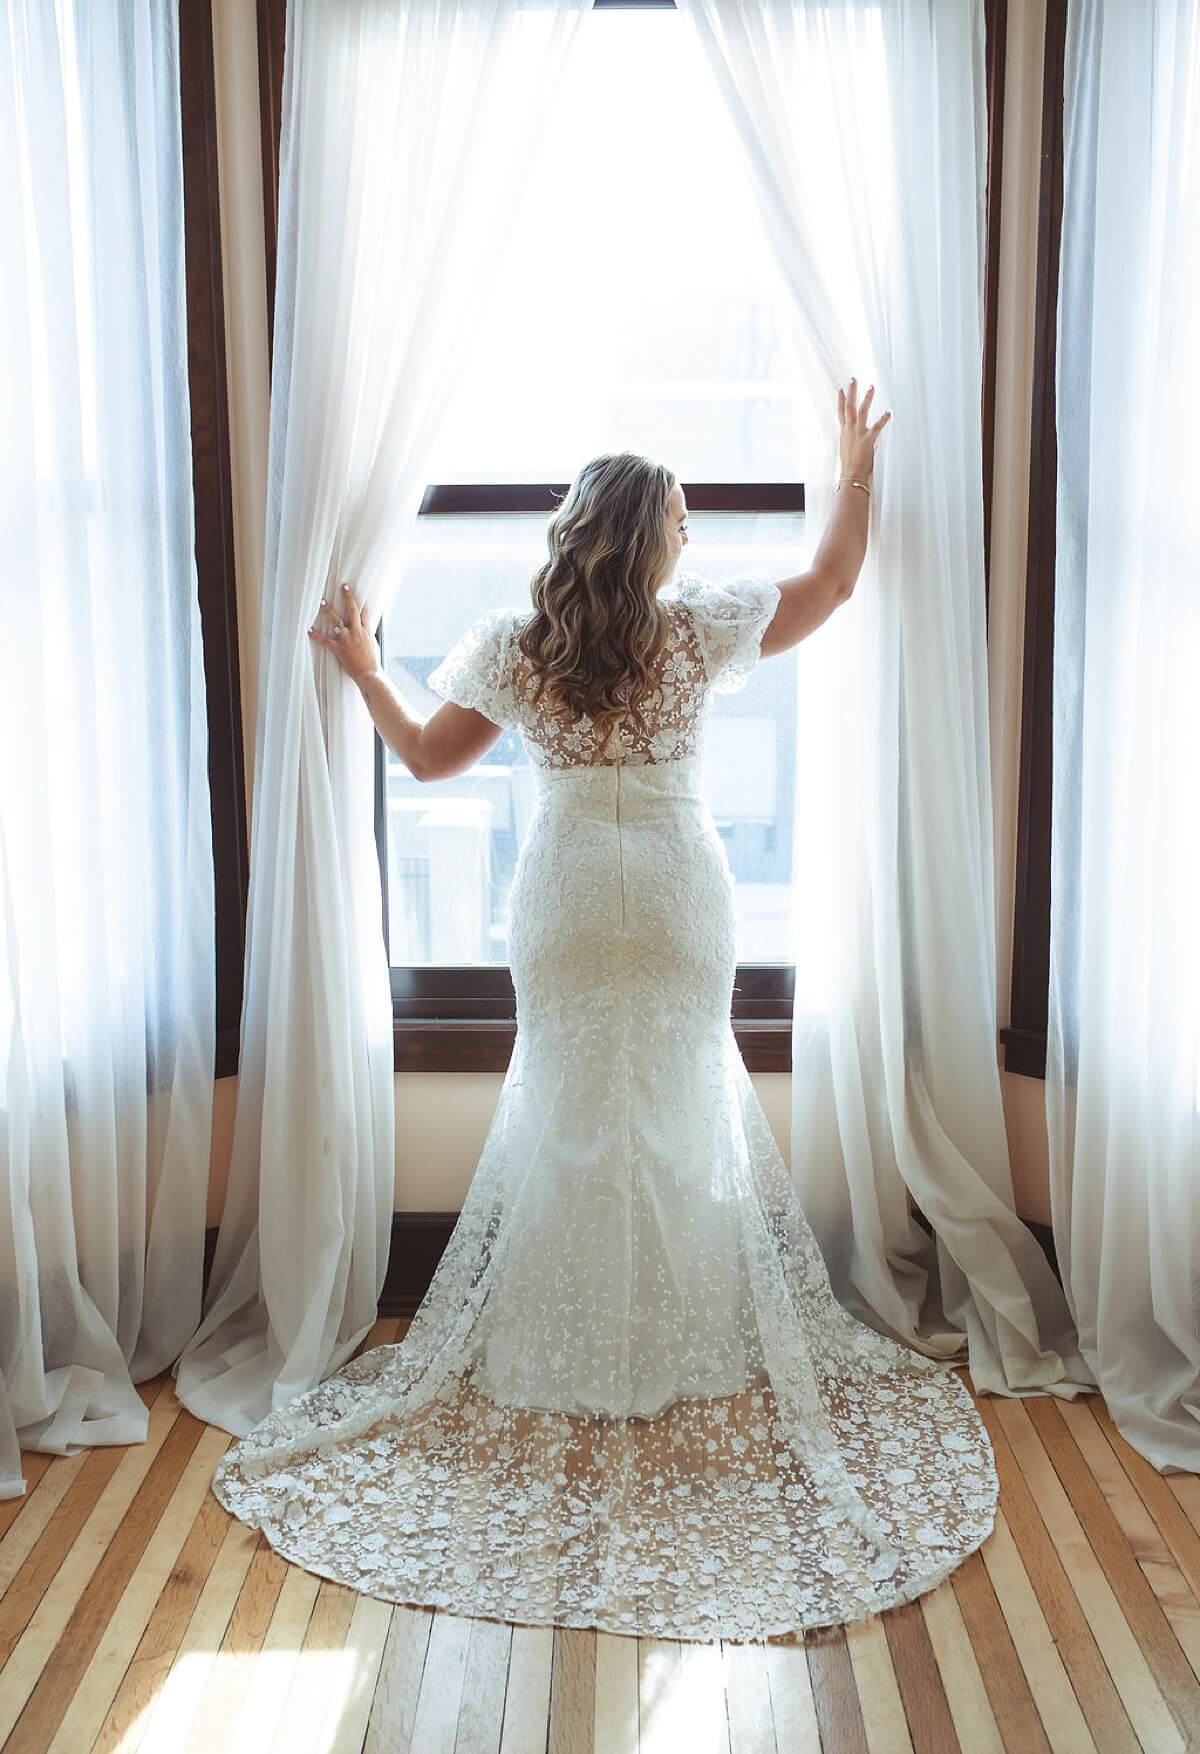 Bride pushing aside curtains while standing at window and looking out